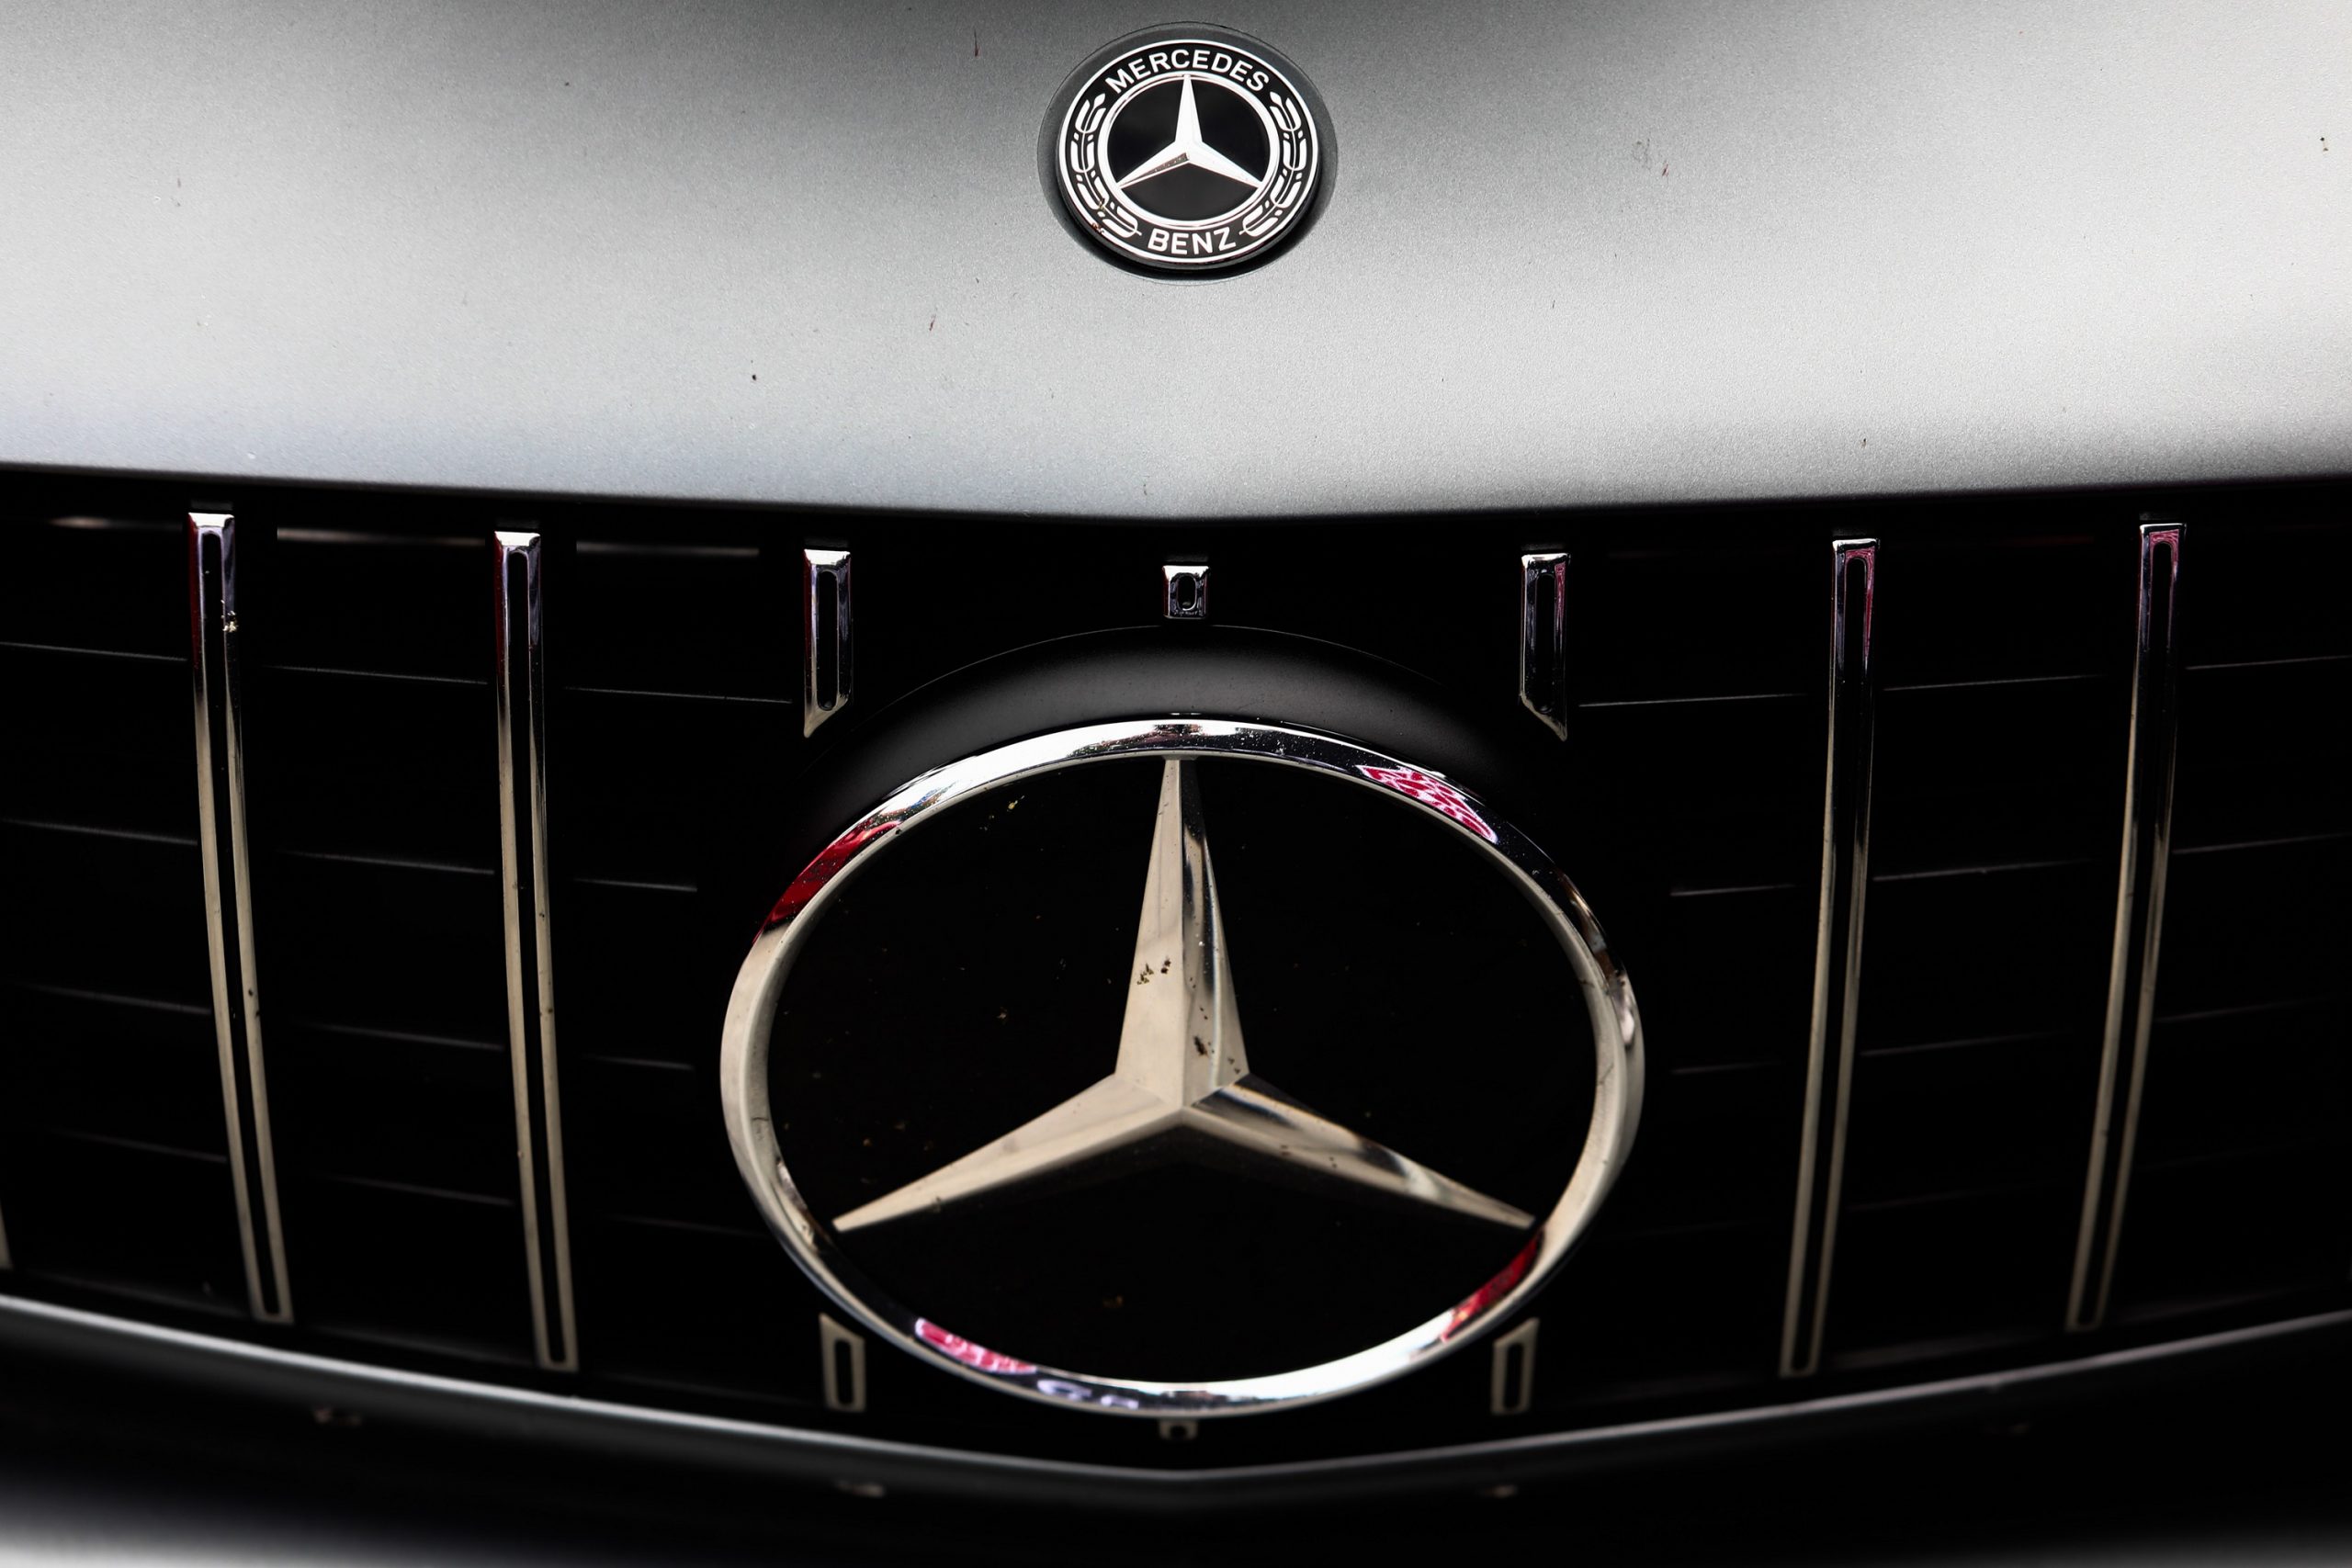 The Mercedes-Benz logo on a GLE 450